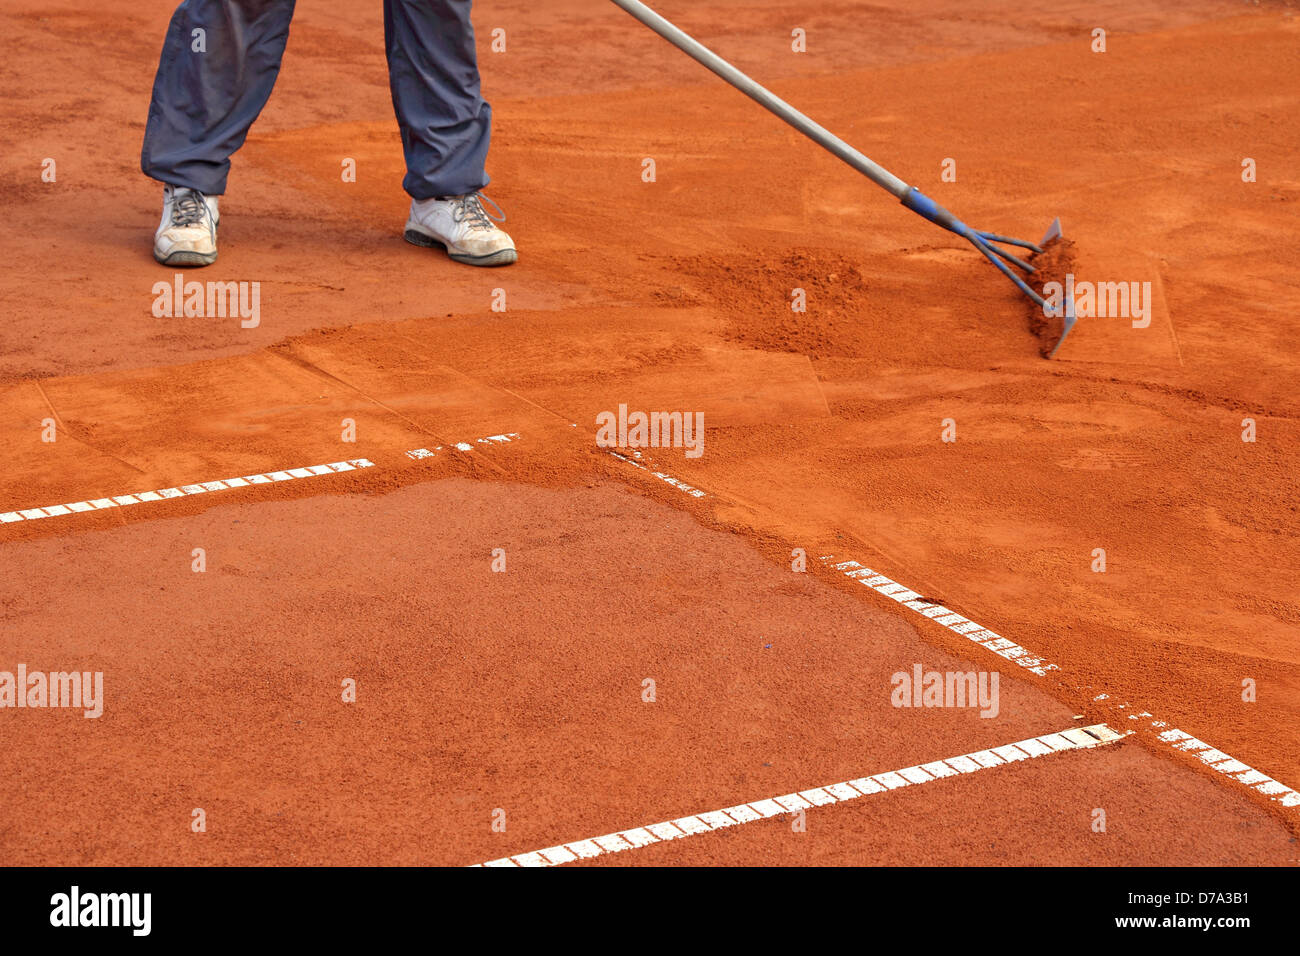 A worker repair the lines on tennis courts Stock Photo